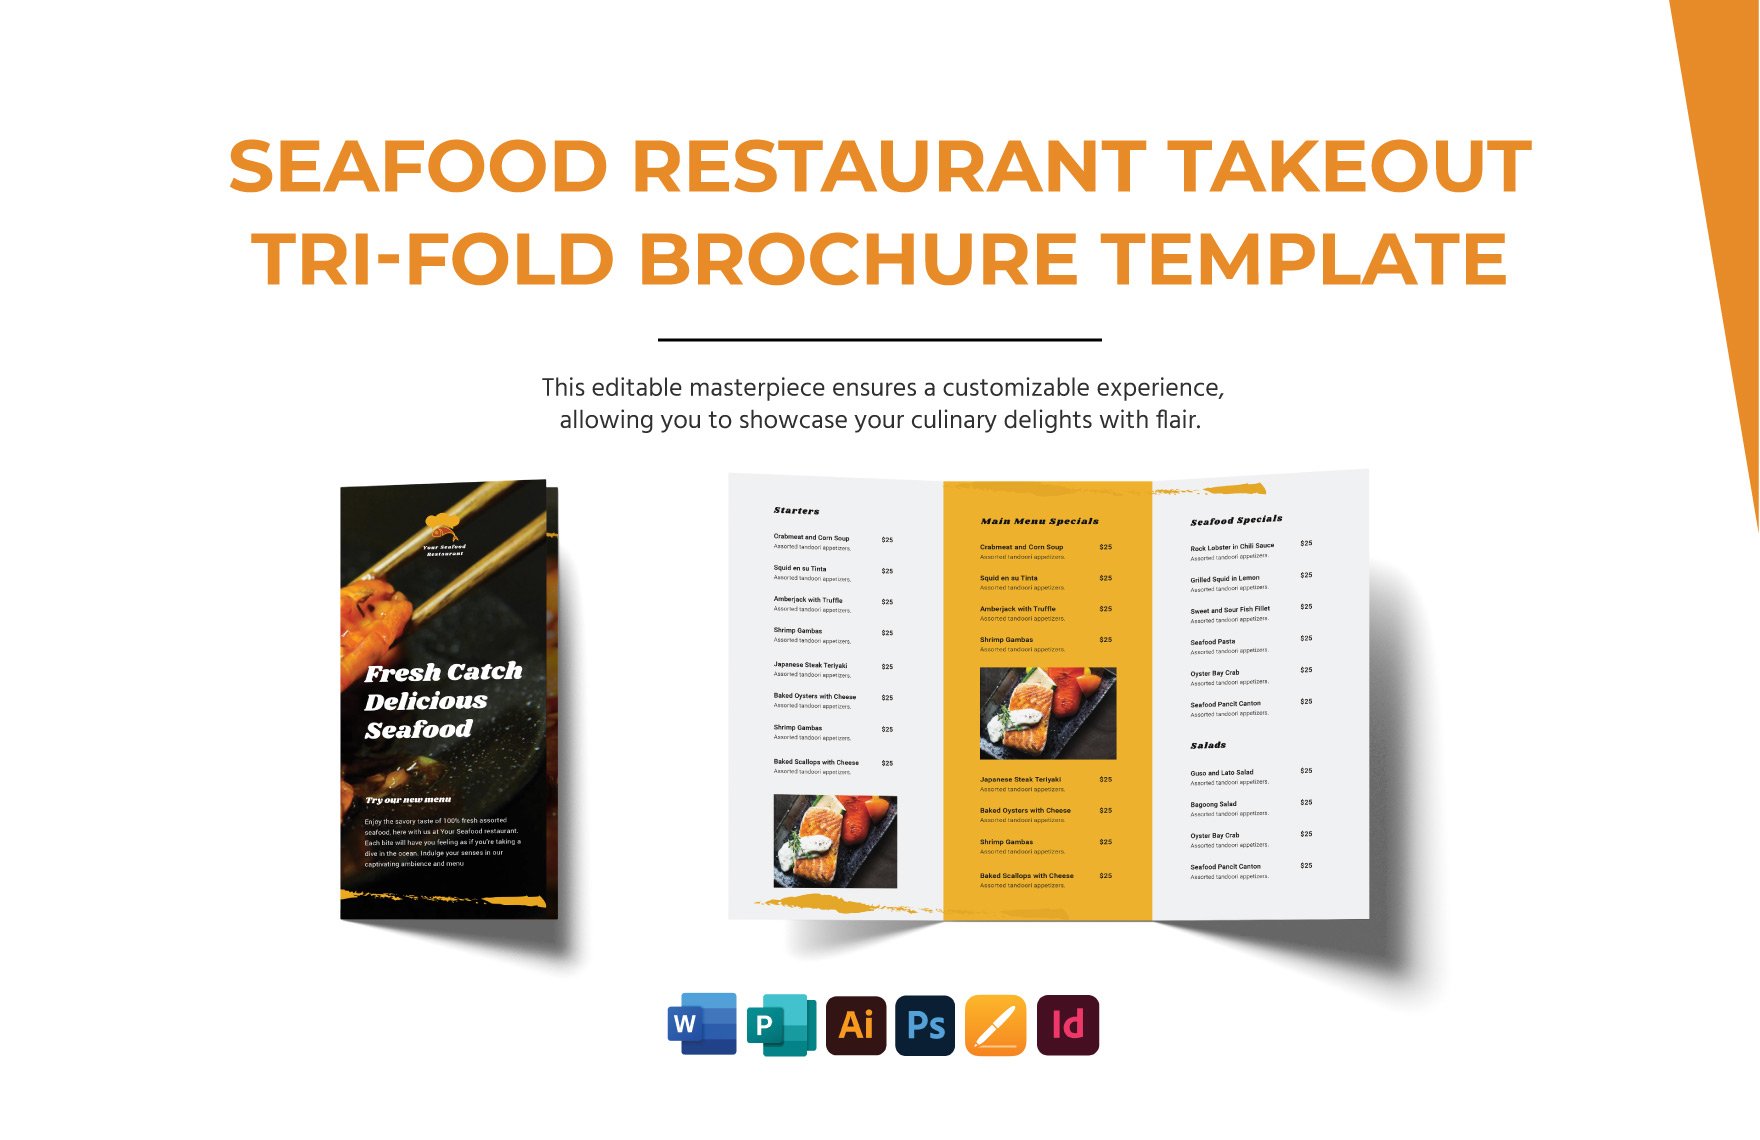 Seafood Restaurant Takeout Tri-Fold Brochure Template